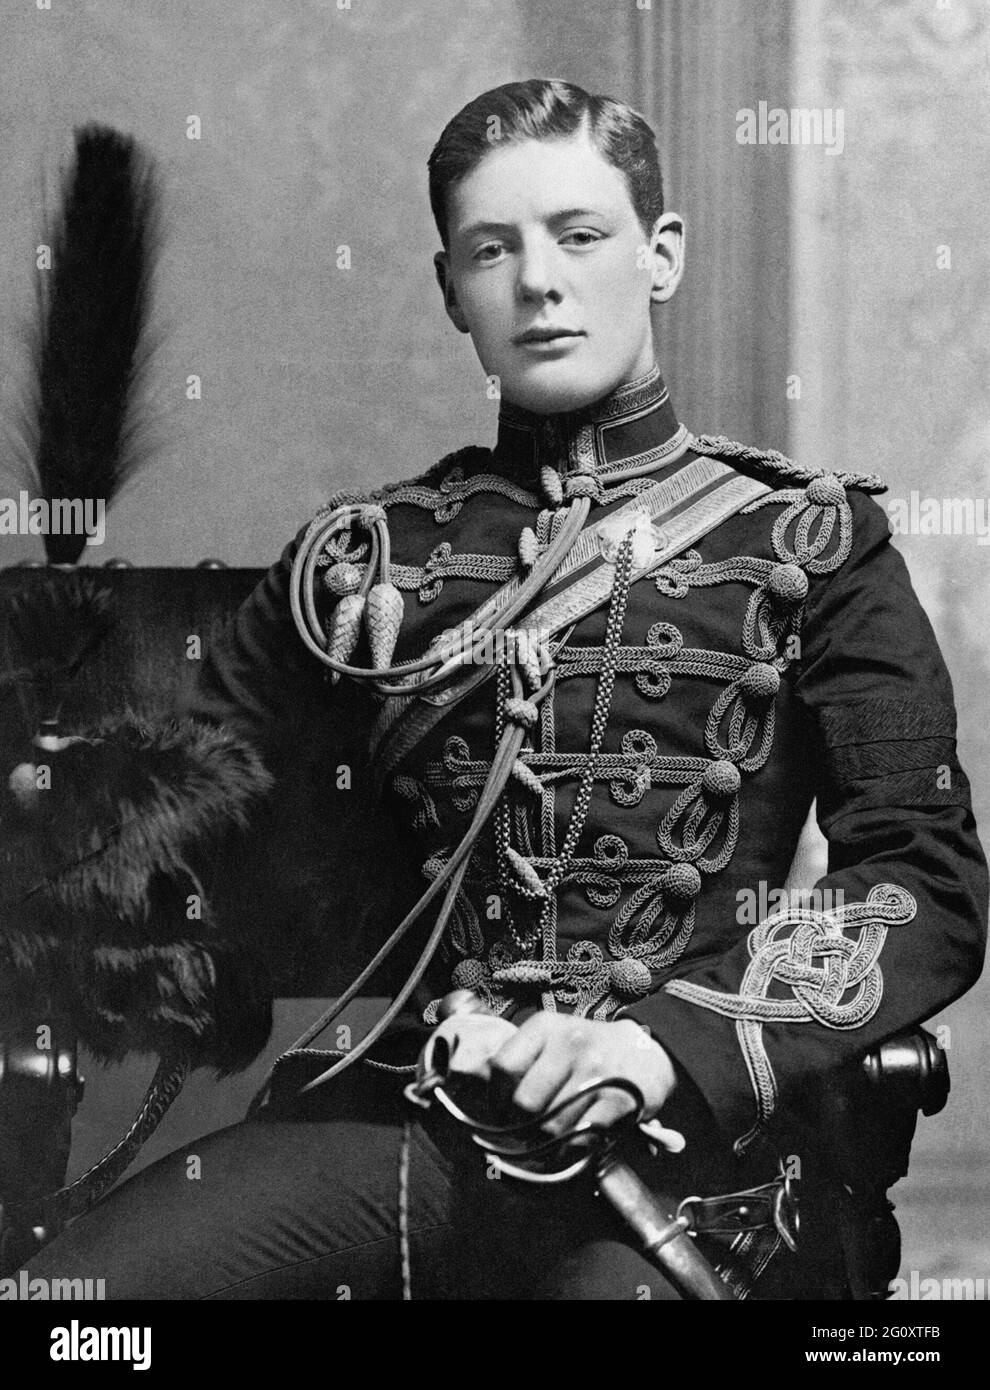 A portrait of 2nd Lieutenant Winston Churchill aged 21 (photo from 1895) dressed in the uniform of 4th Queen's Own Hussars Stock Photo